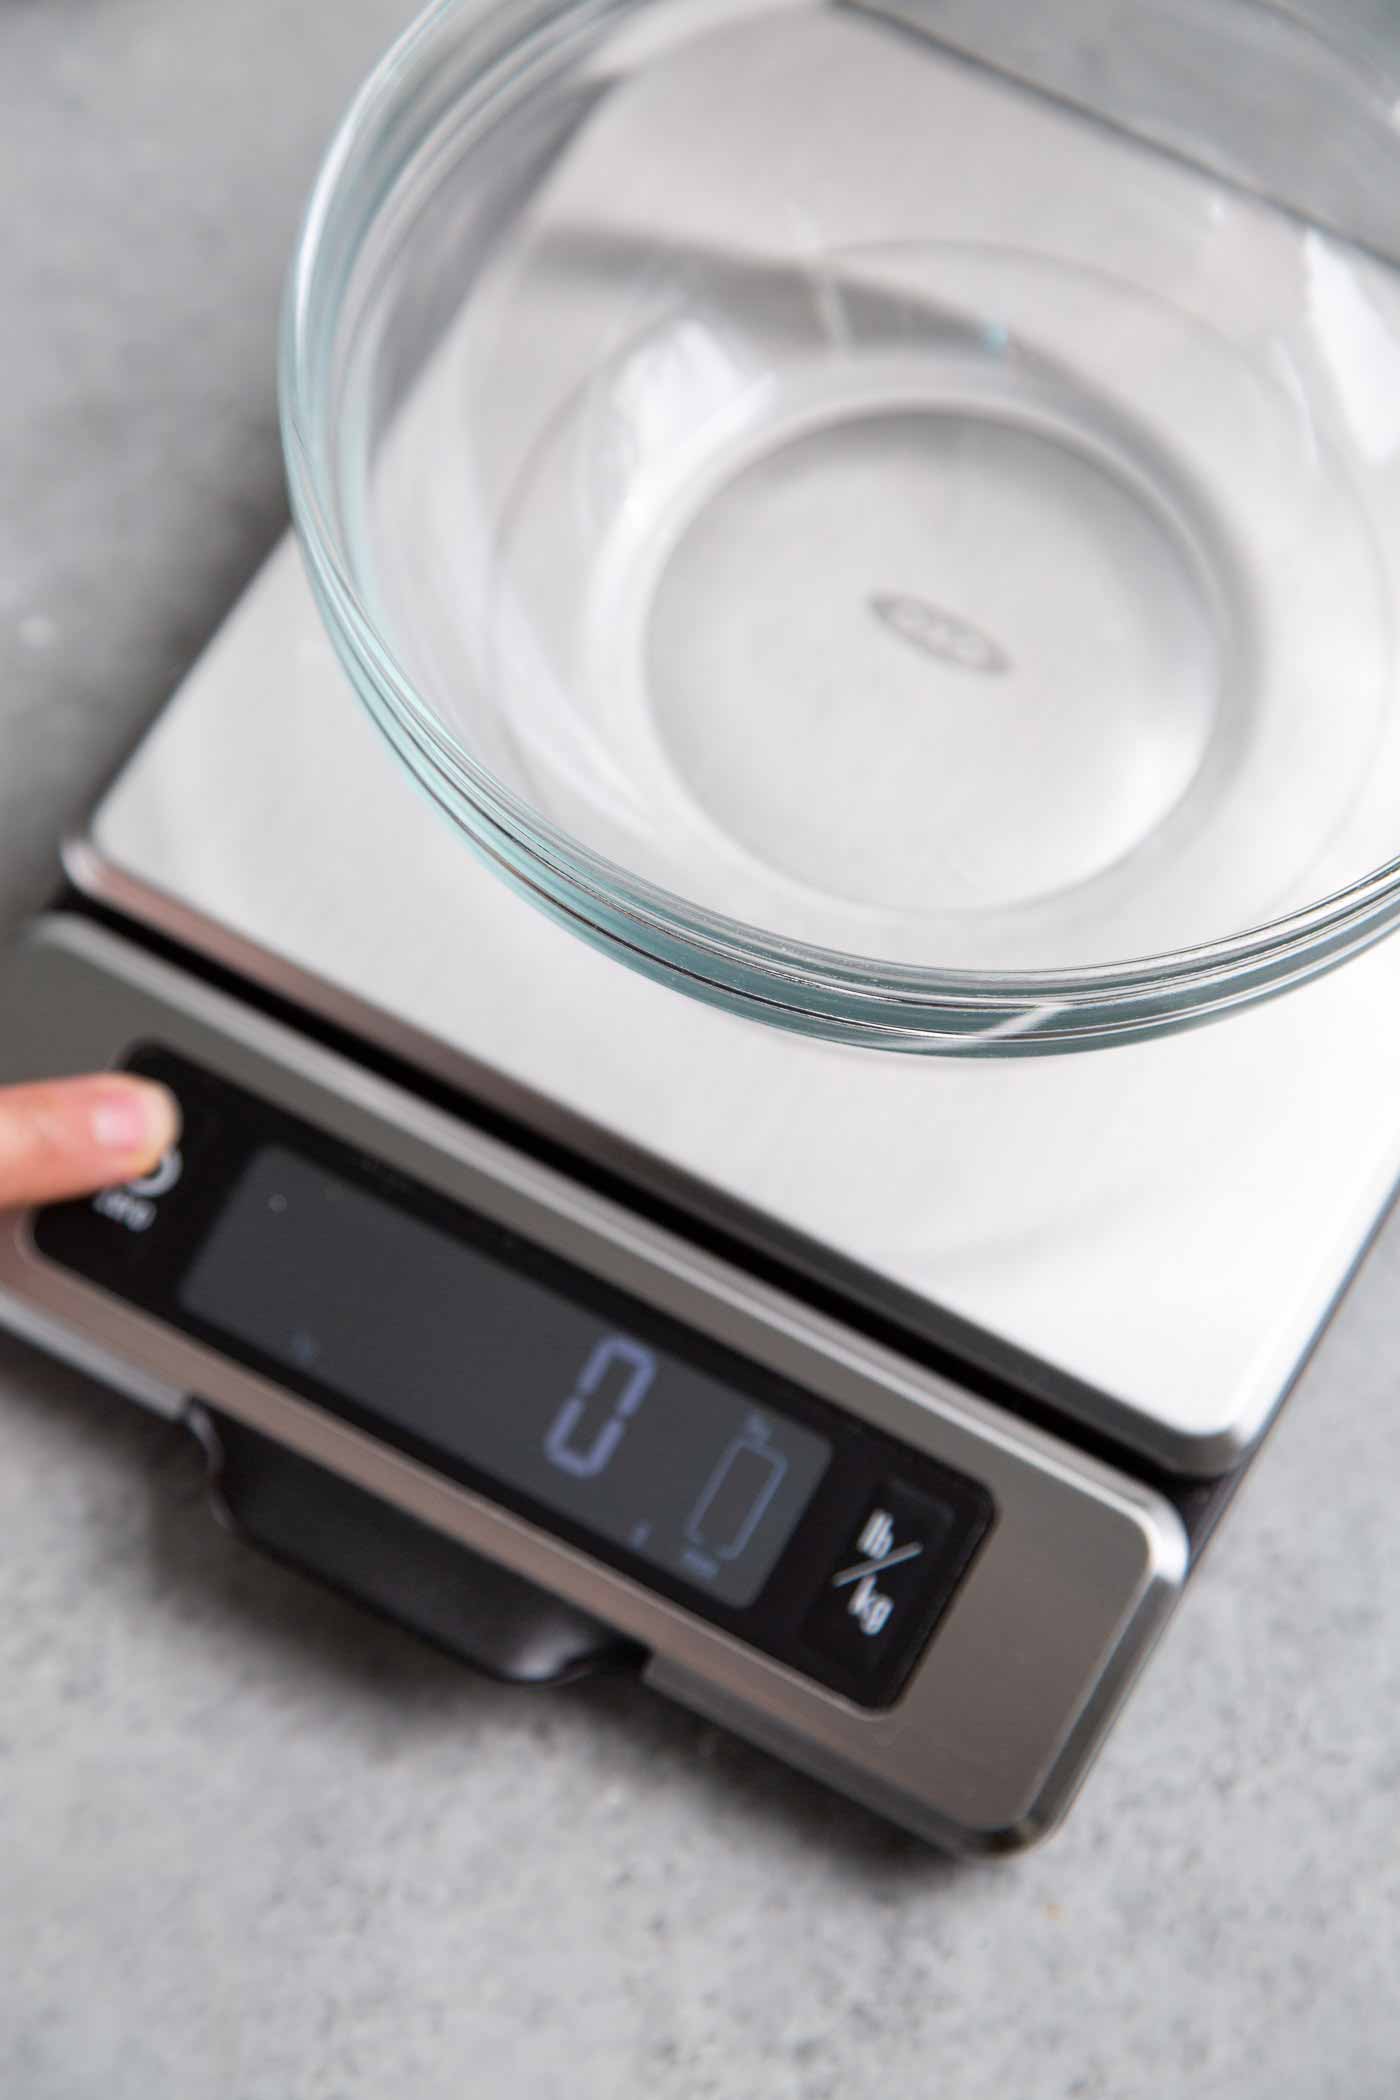 How to properly measure flour using kitchen scale